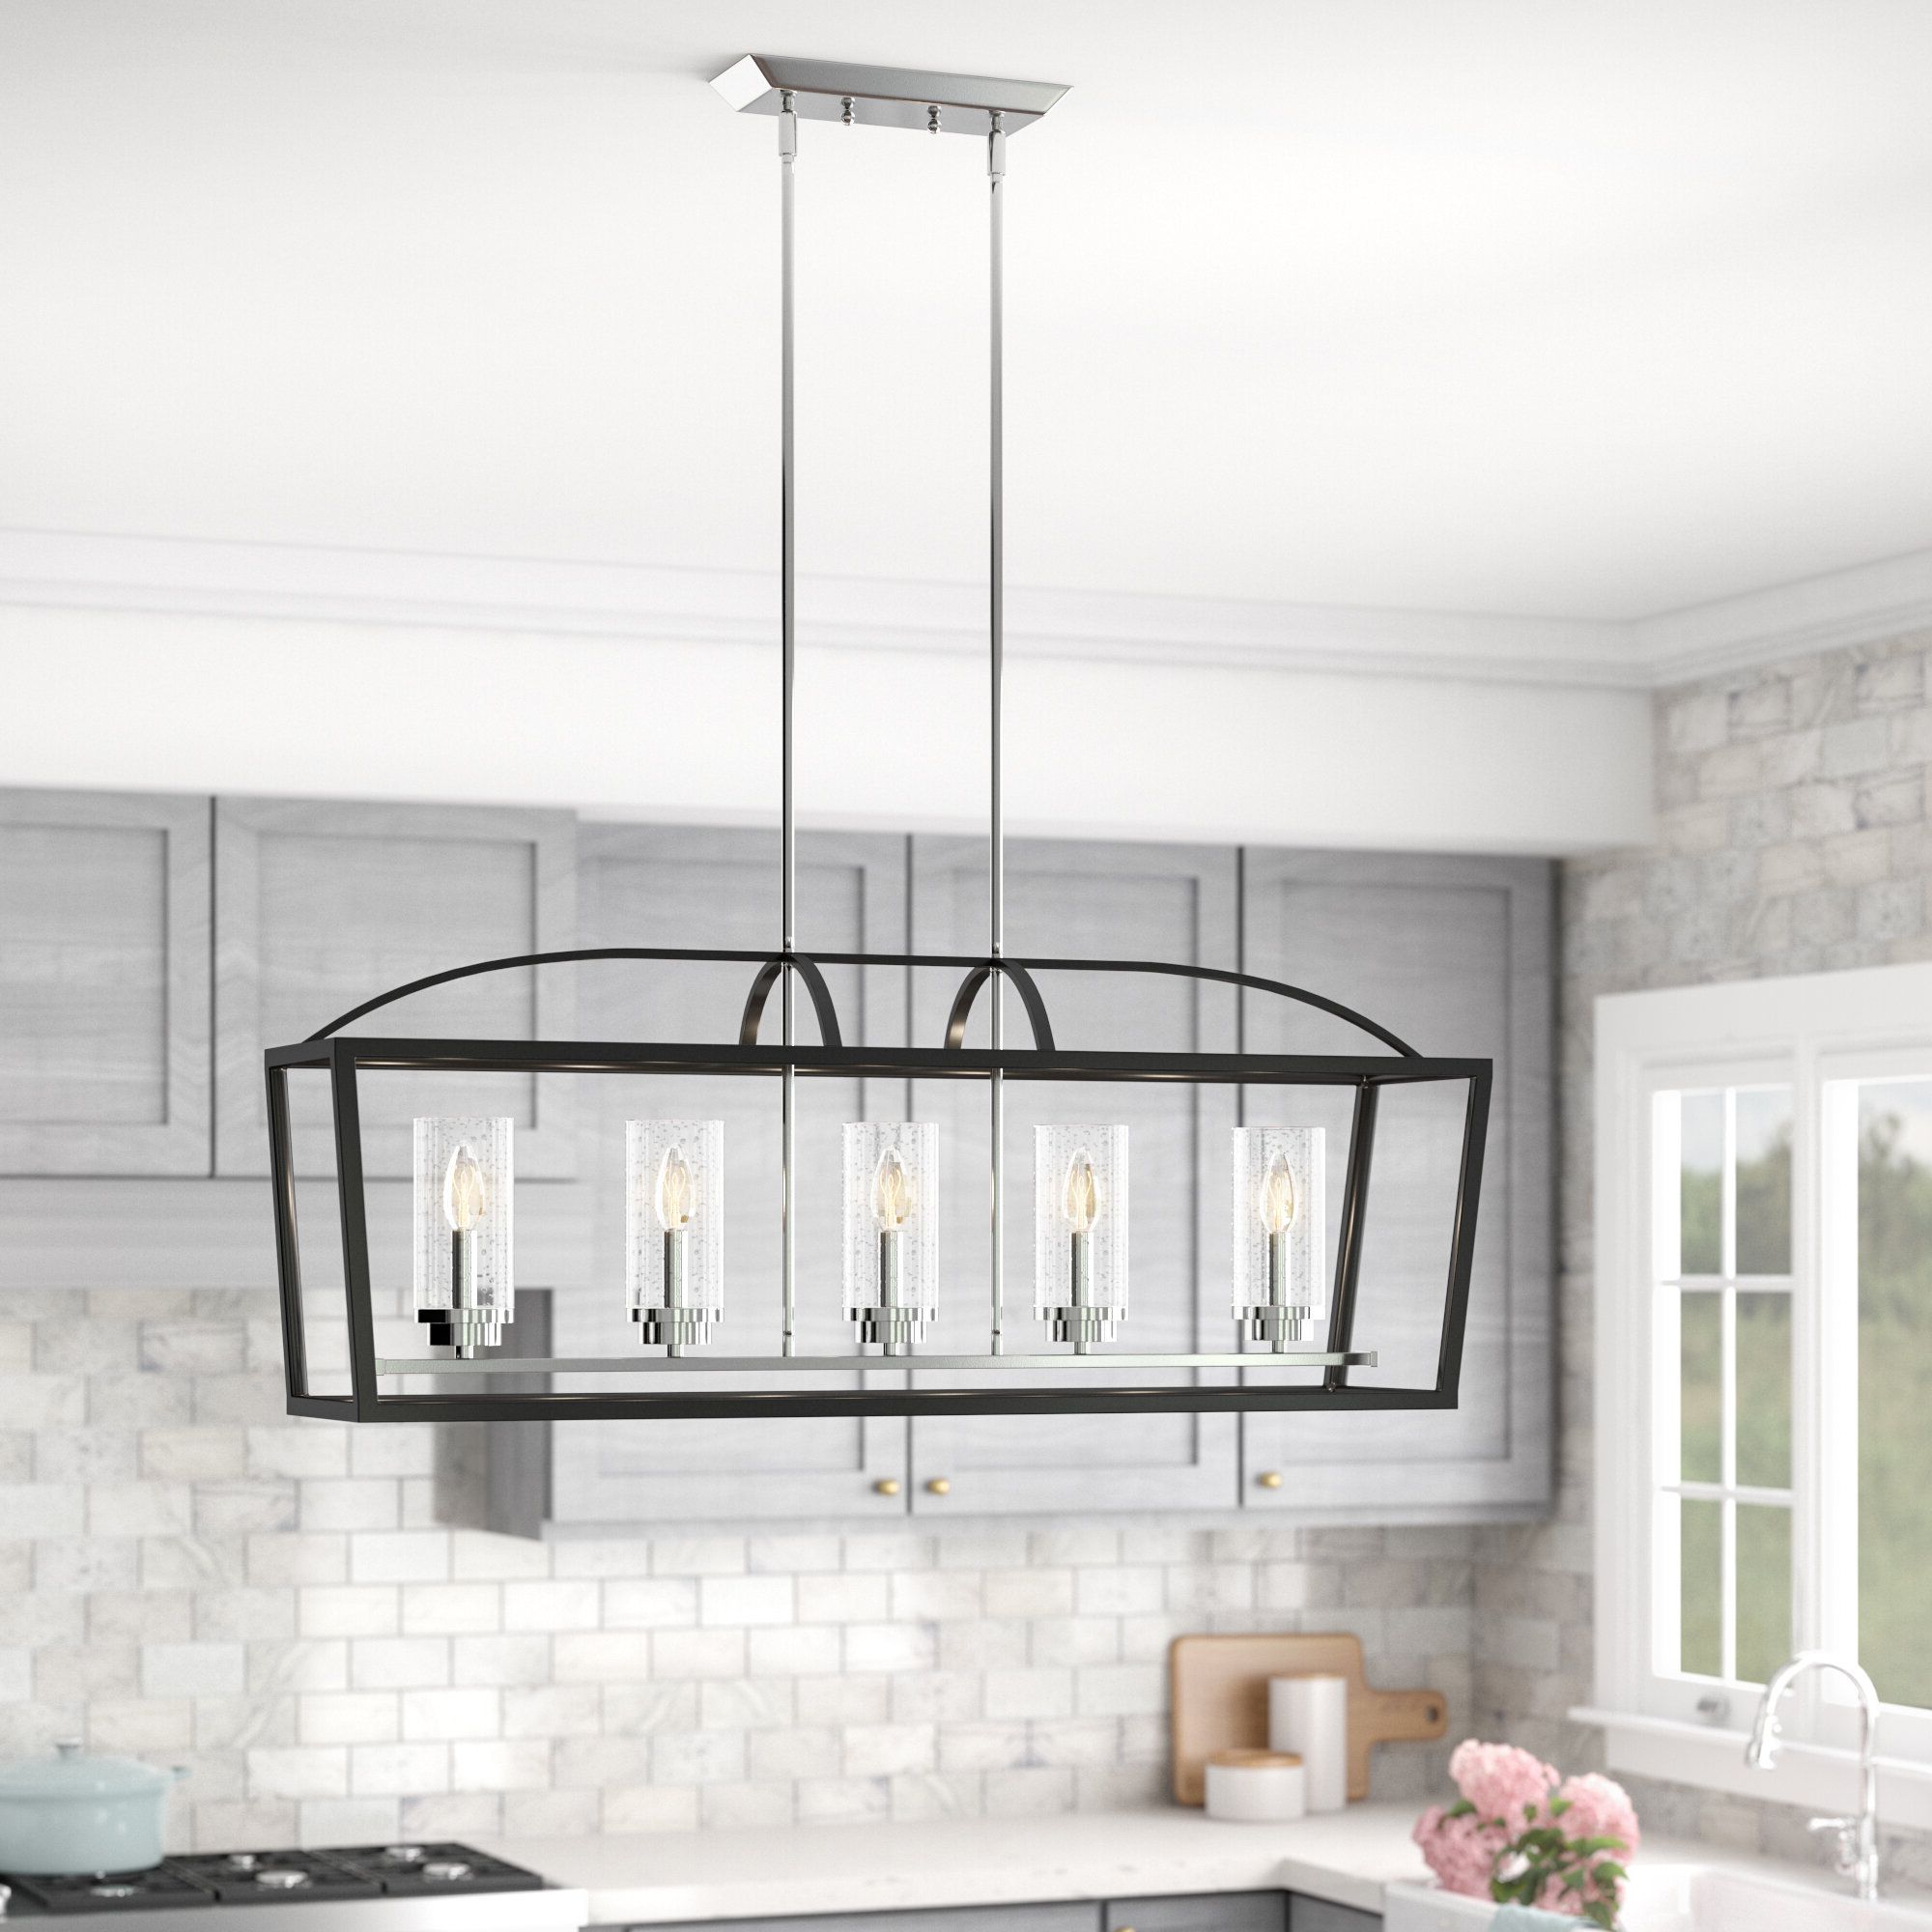 Widely Used Delon 5 Light Kitchen Island Linear Pendants For Luna 5 Light Kitchen Island Linear Pendant (View 10 of 25)